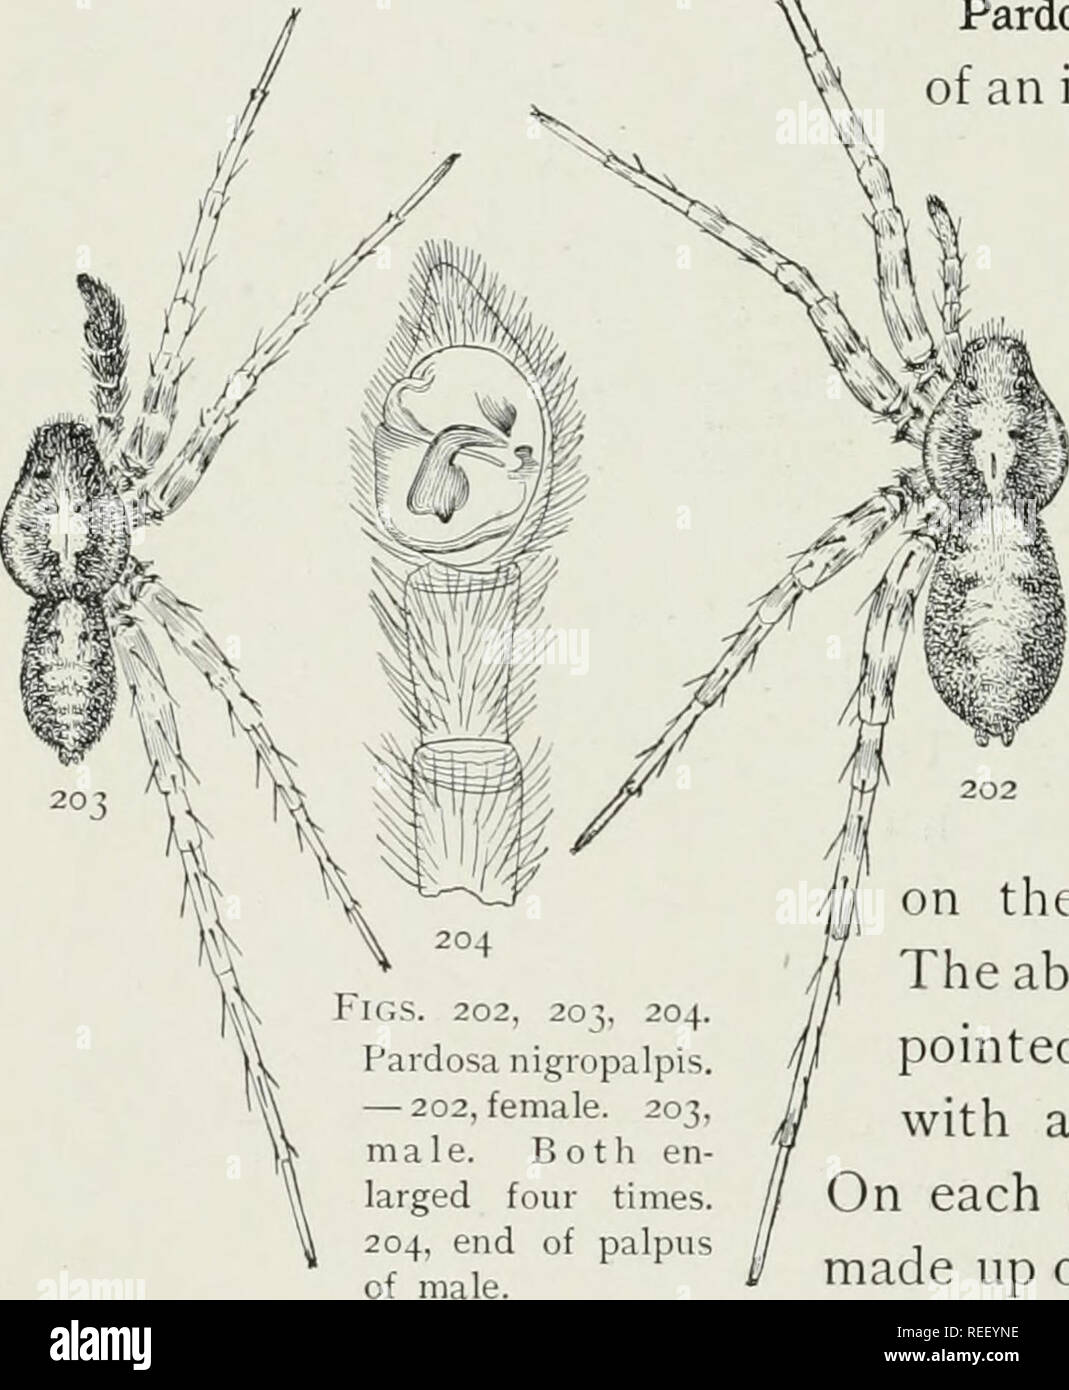 . The common spiders of the United States. Spiders. THE COMMON SPIDERS the cephalothorax and abdomen are less distinct and more broken and irregular. The epigynum (fig. 195) has a character- istic shape different from any of the allied species, the two anterior depressions being wide apart and the middle ridge narrow and rounded at the end. The male palpi (fig. 196) are rather slender, as in lapidicina, and uniformly colored, and all the differences between the sexes are less strongly marked than in Jiigropalpis and albo-  patella. Pardosa pallida. — One-fifth of an inch long and brightly mar Stock Photo